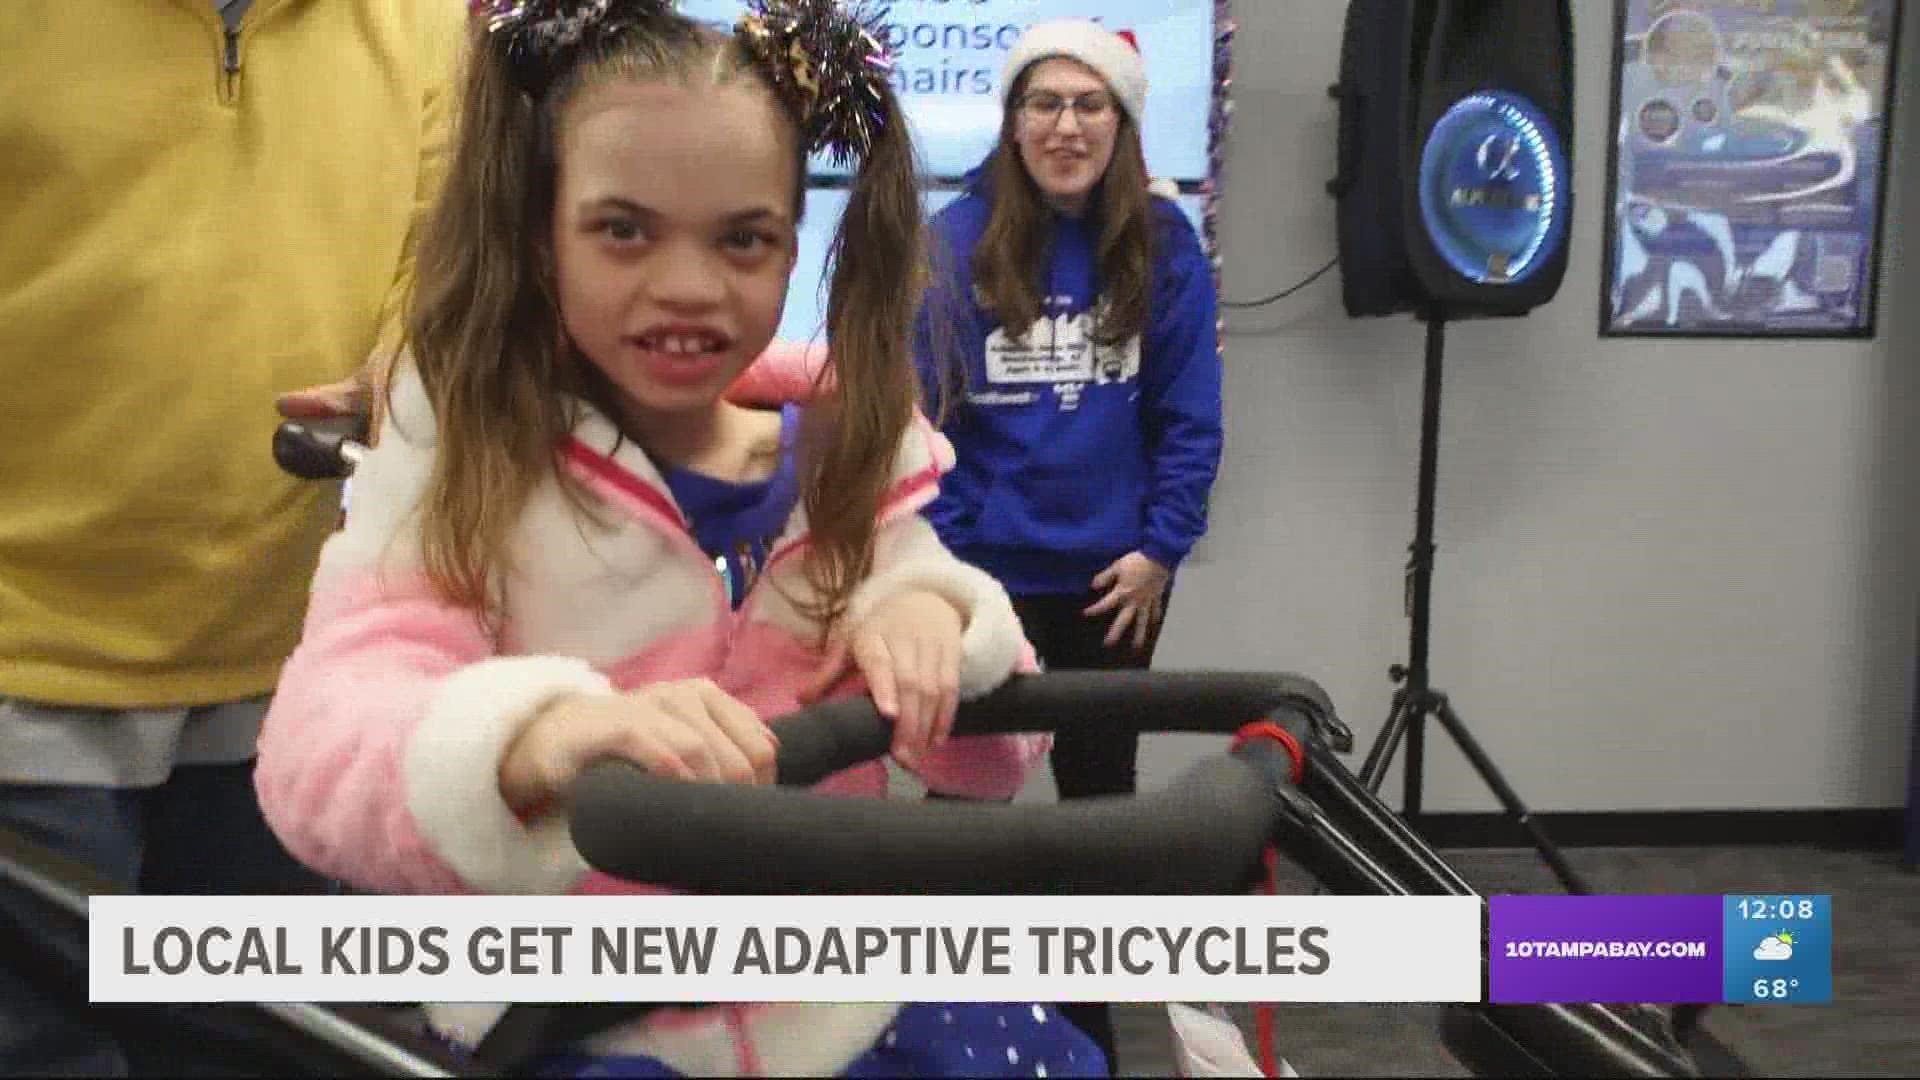 The special therapy tricycles help the kids practice balance and increase strength.